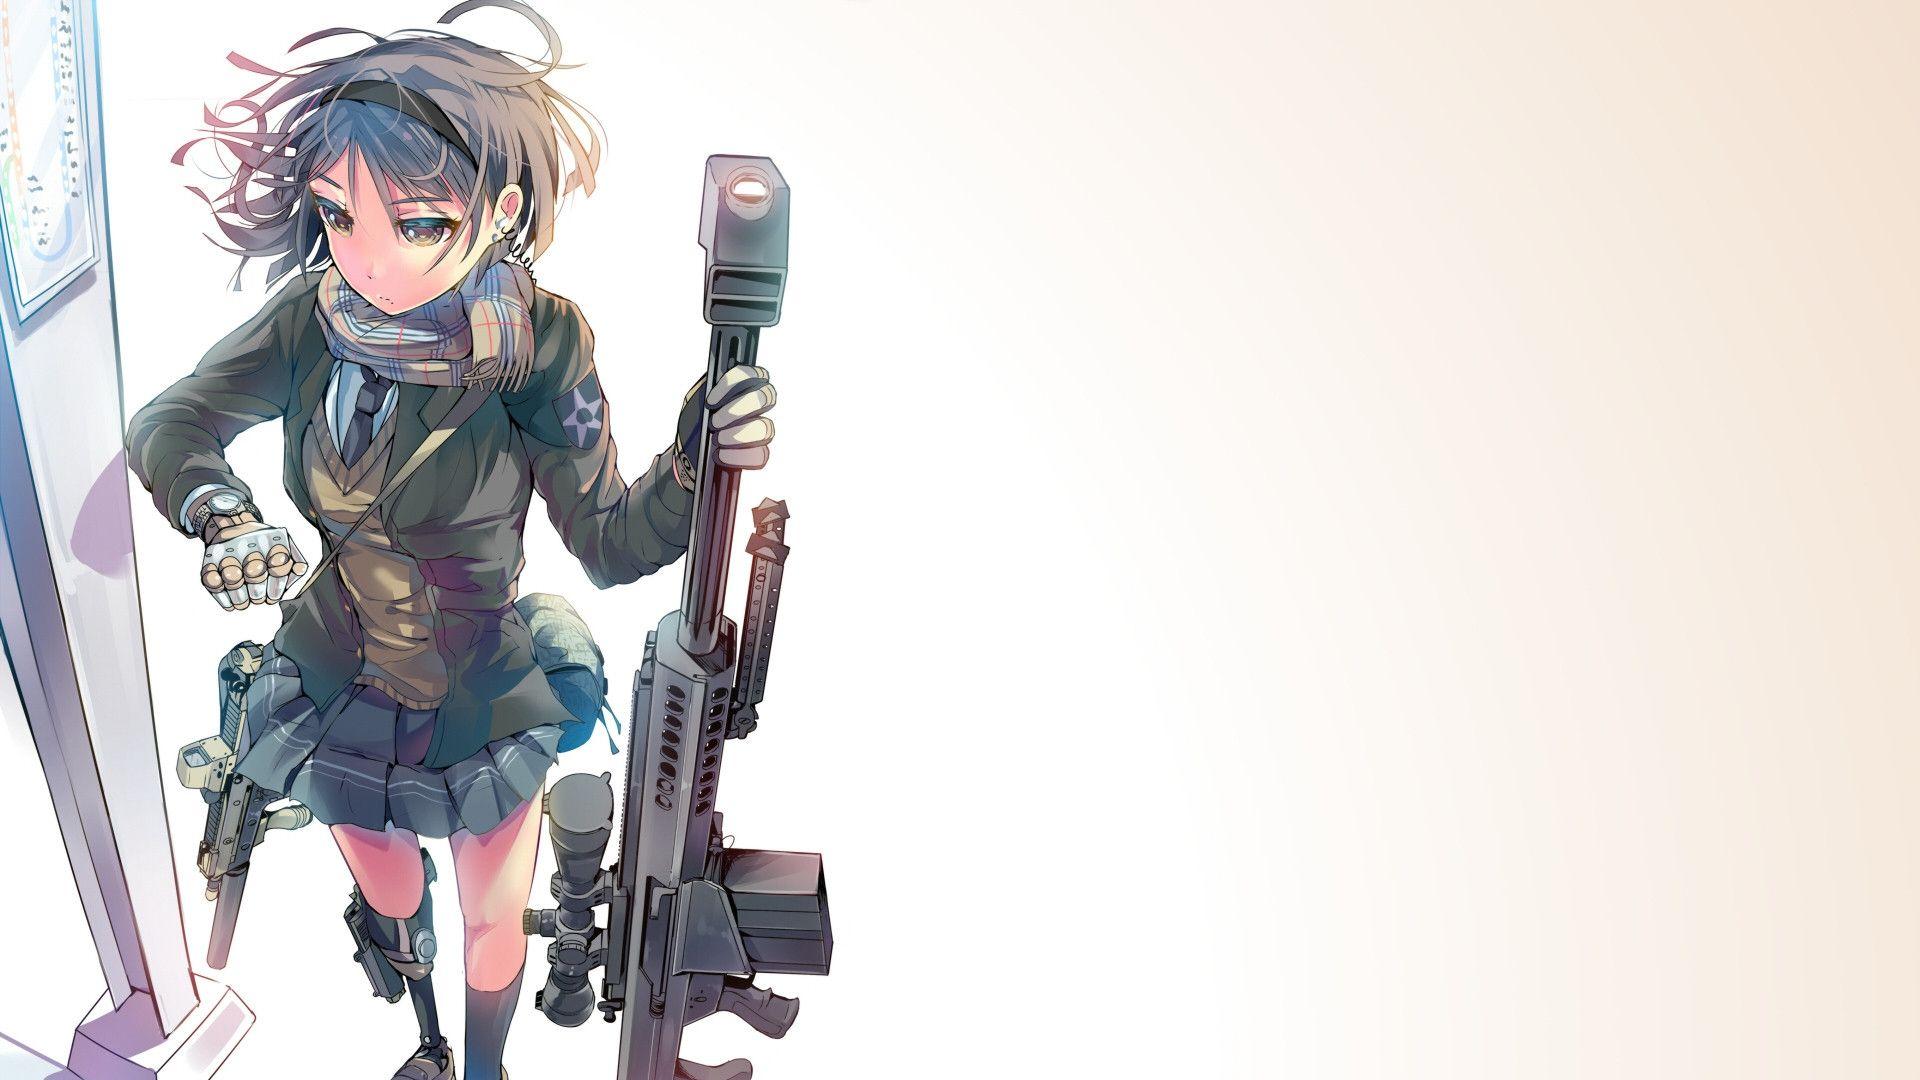 25 Coolest Anime Guns You Need to See Ranked